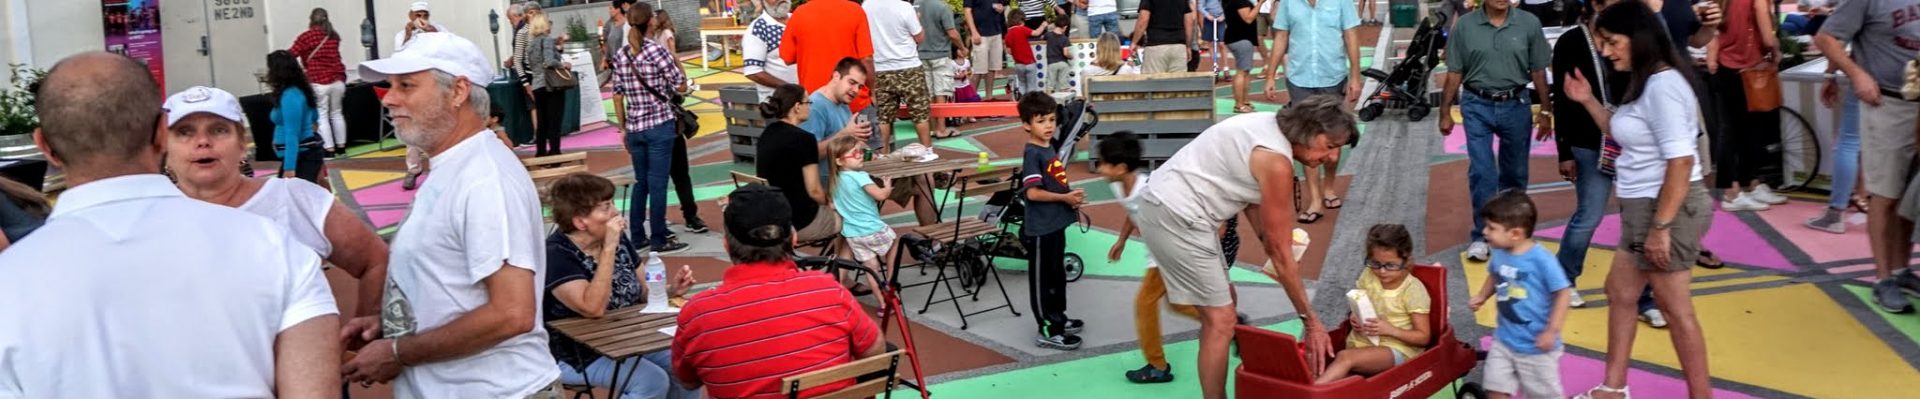 Street Plans to Host a Webinar this Friday 10/20 on Tactical Urbanism